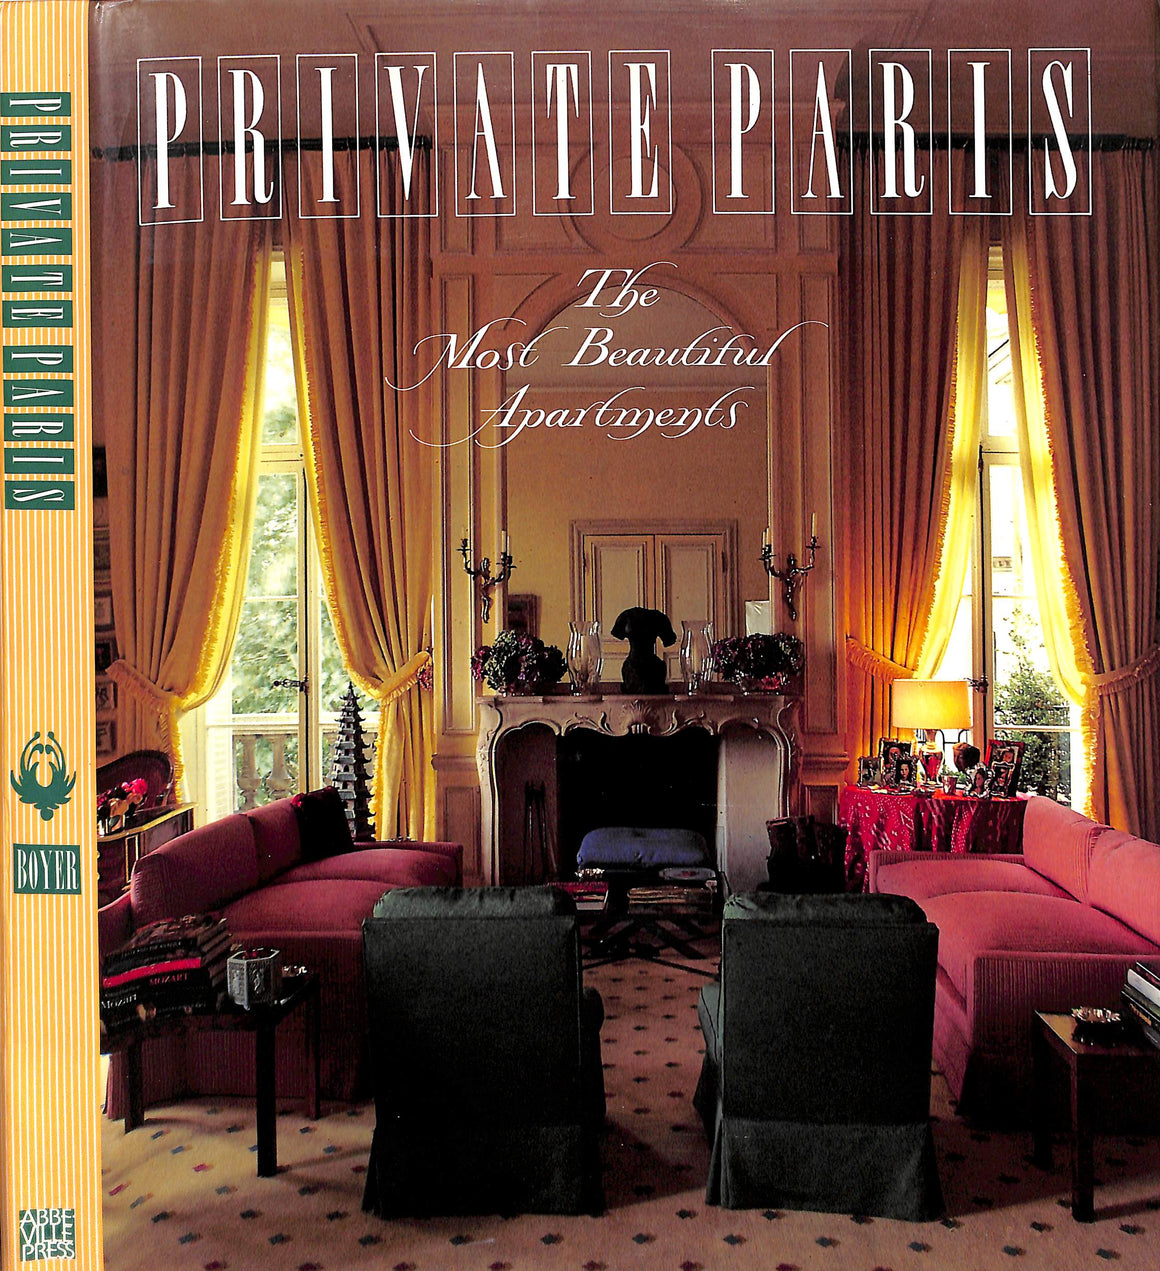 "Private Paris The Most Beautiful Apartments" 1988 BOYER, Marie-France [text by]